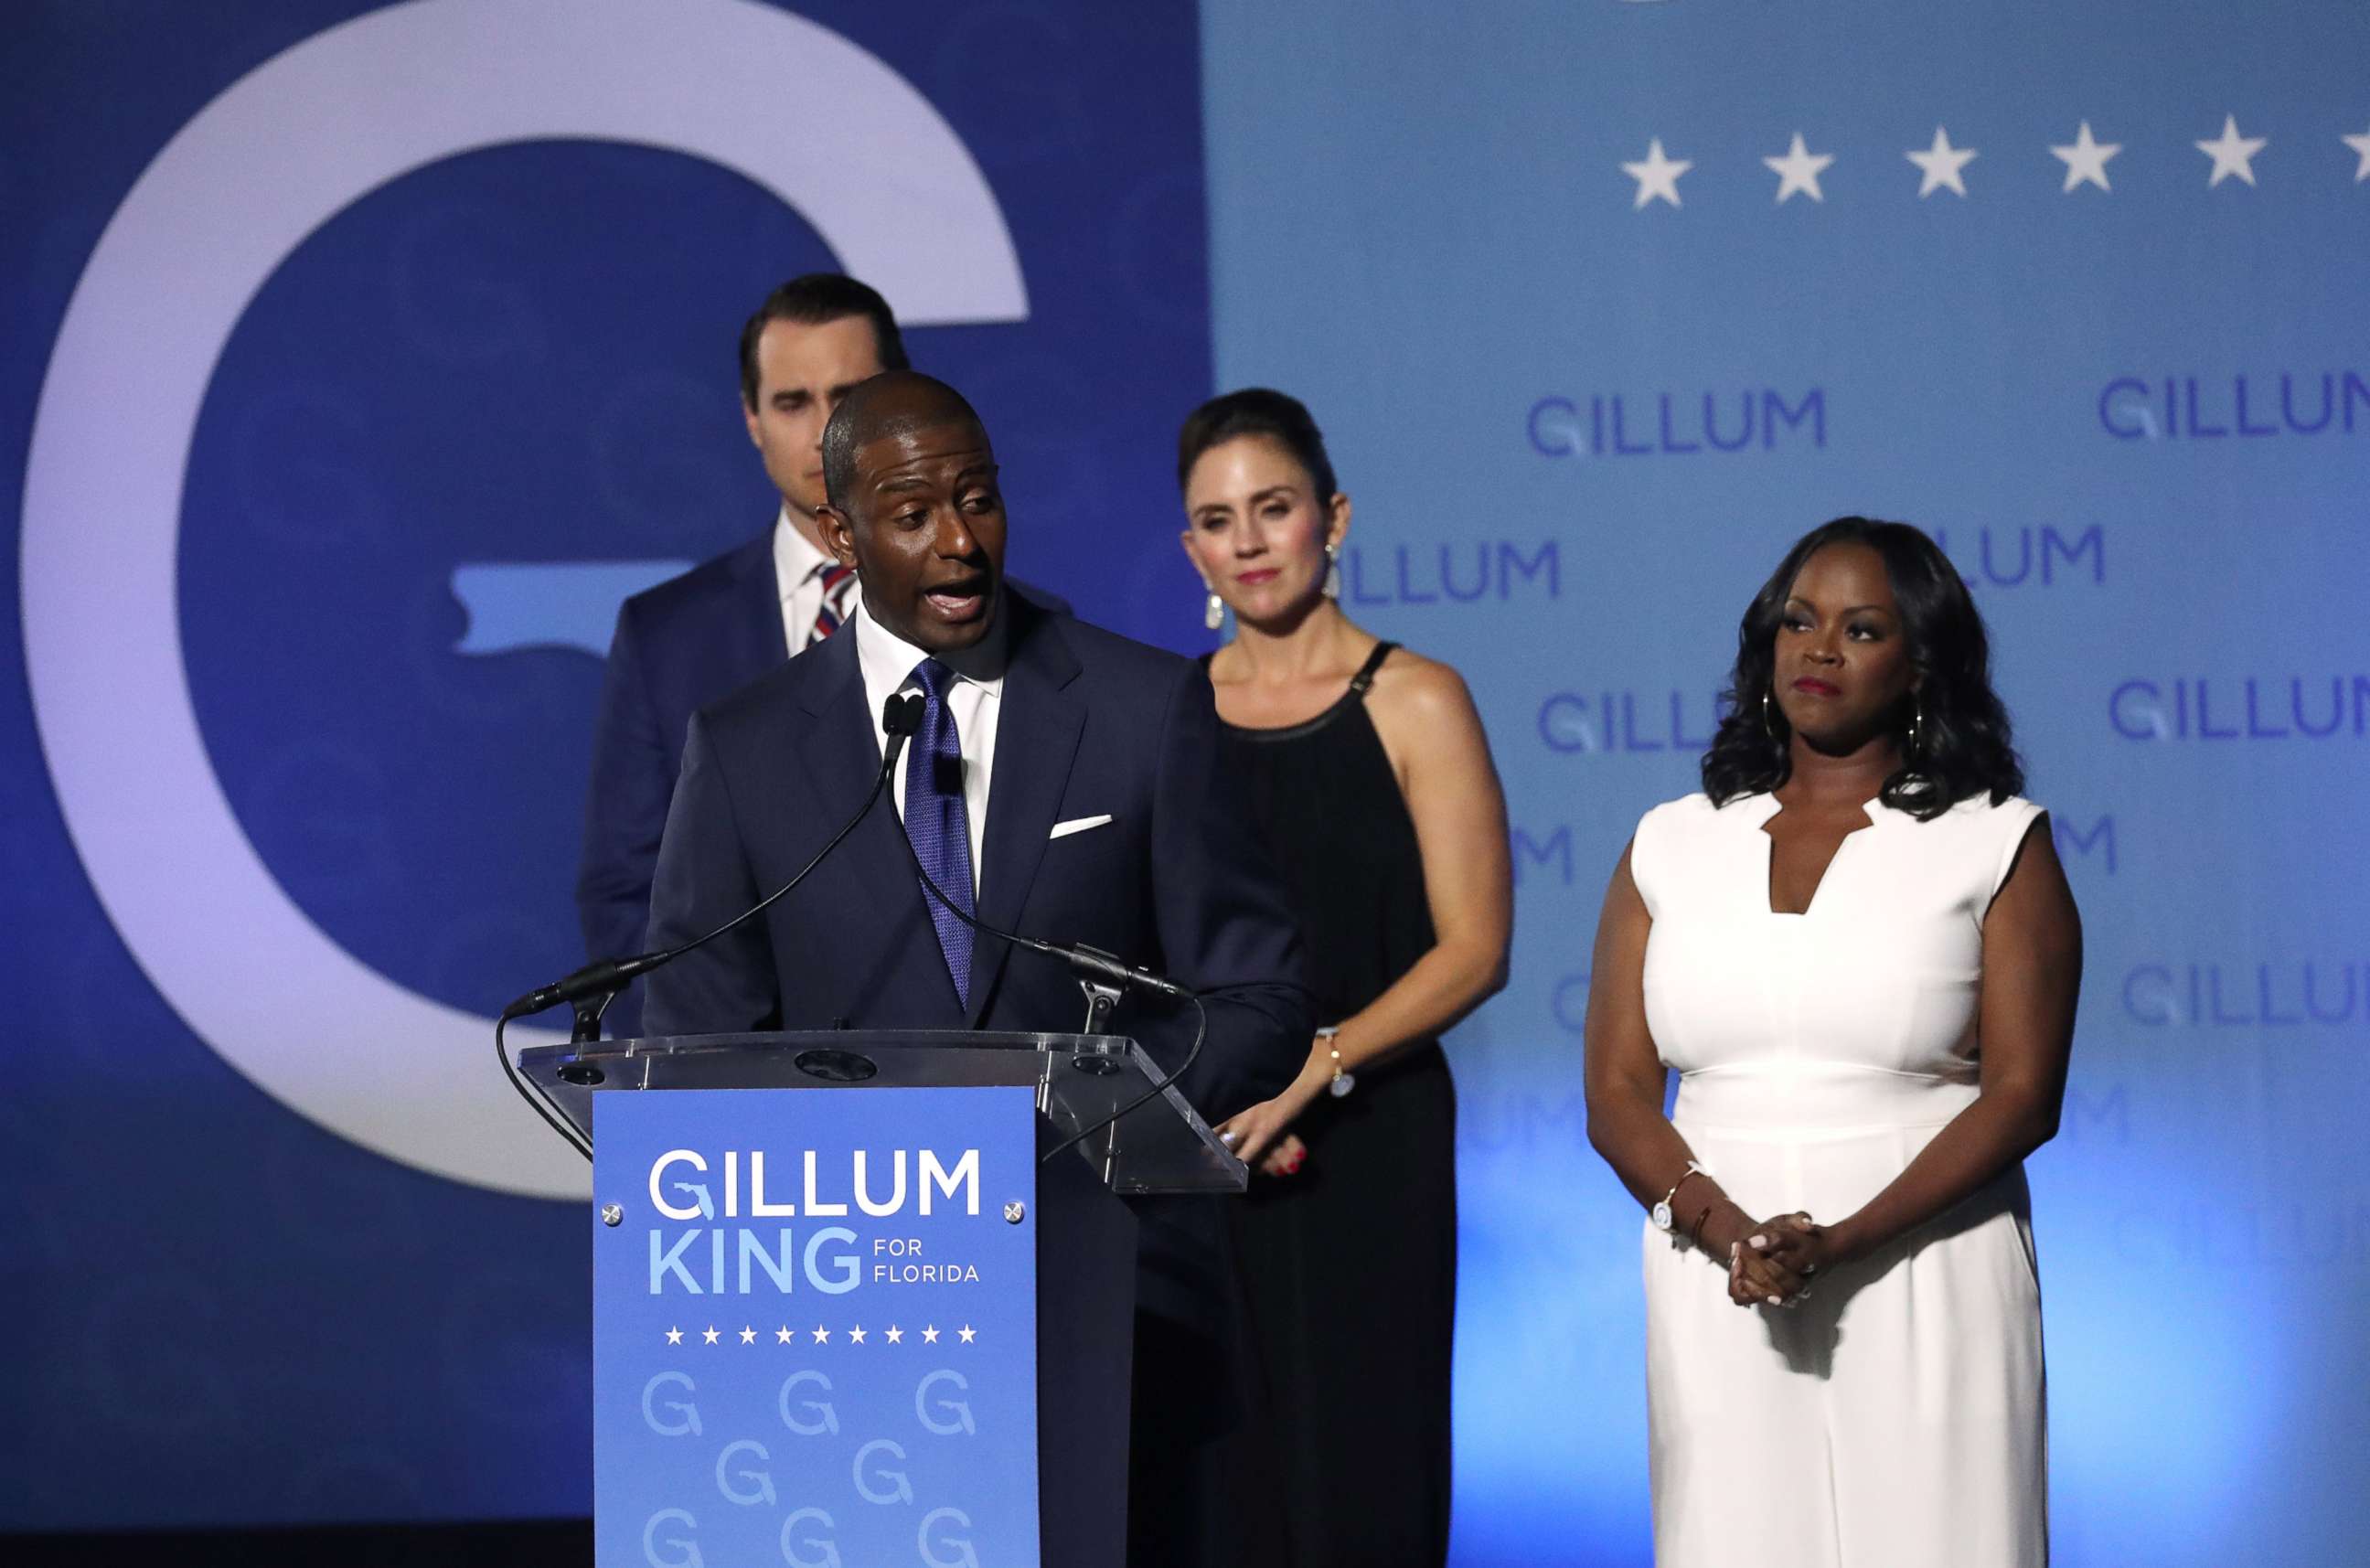 PHOTO: Democratic Florida gubernatorial nominee and Tallahassee Mayor Andrew Gillum concedes the race to Rep. Ron DeSantis during his midterm election night rally in Tallahassee, Fla., Nov. 6, 2018.